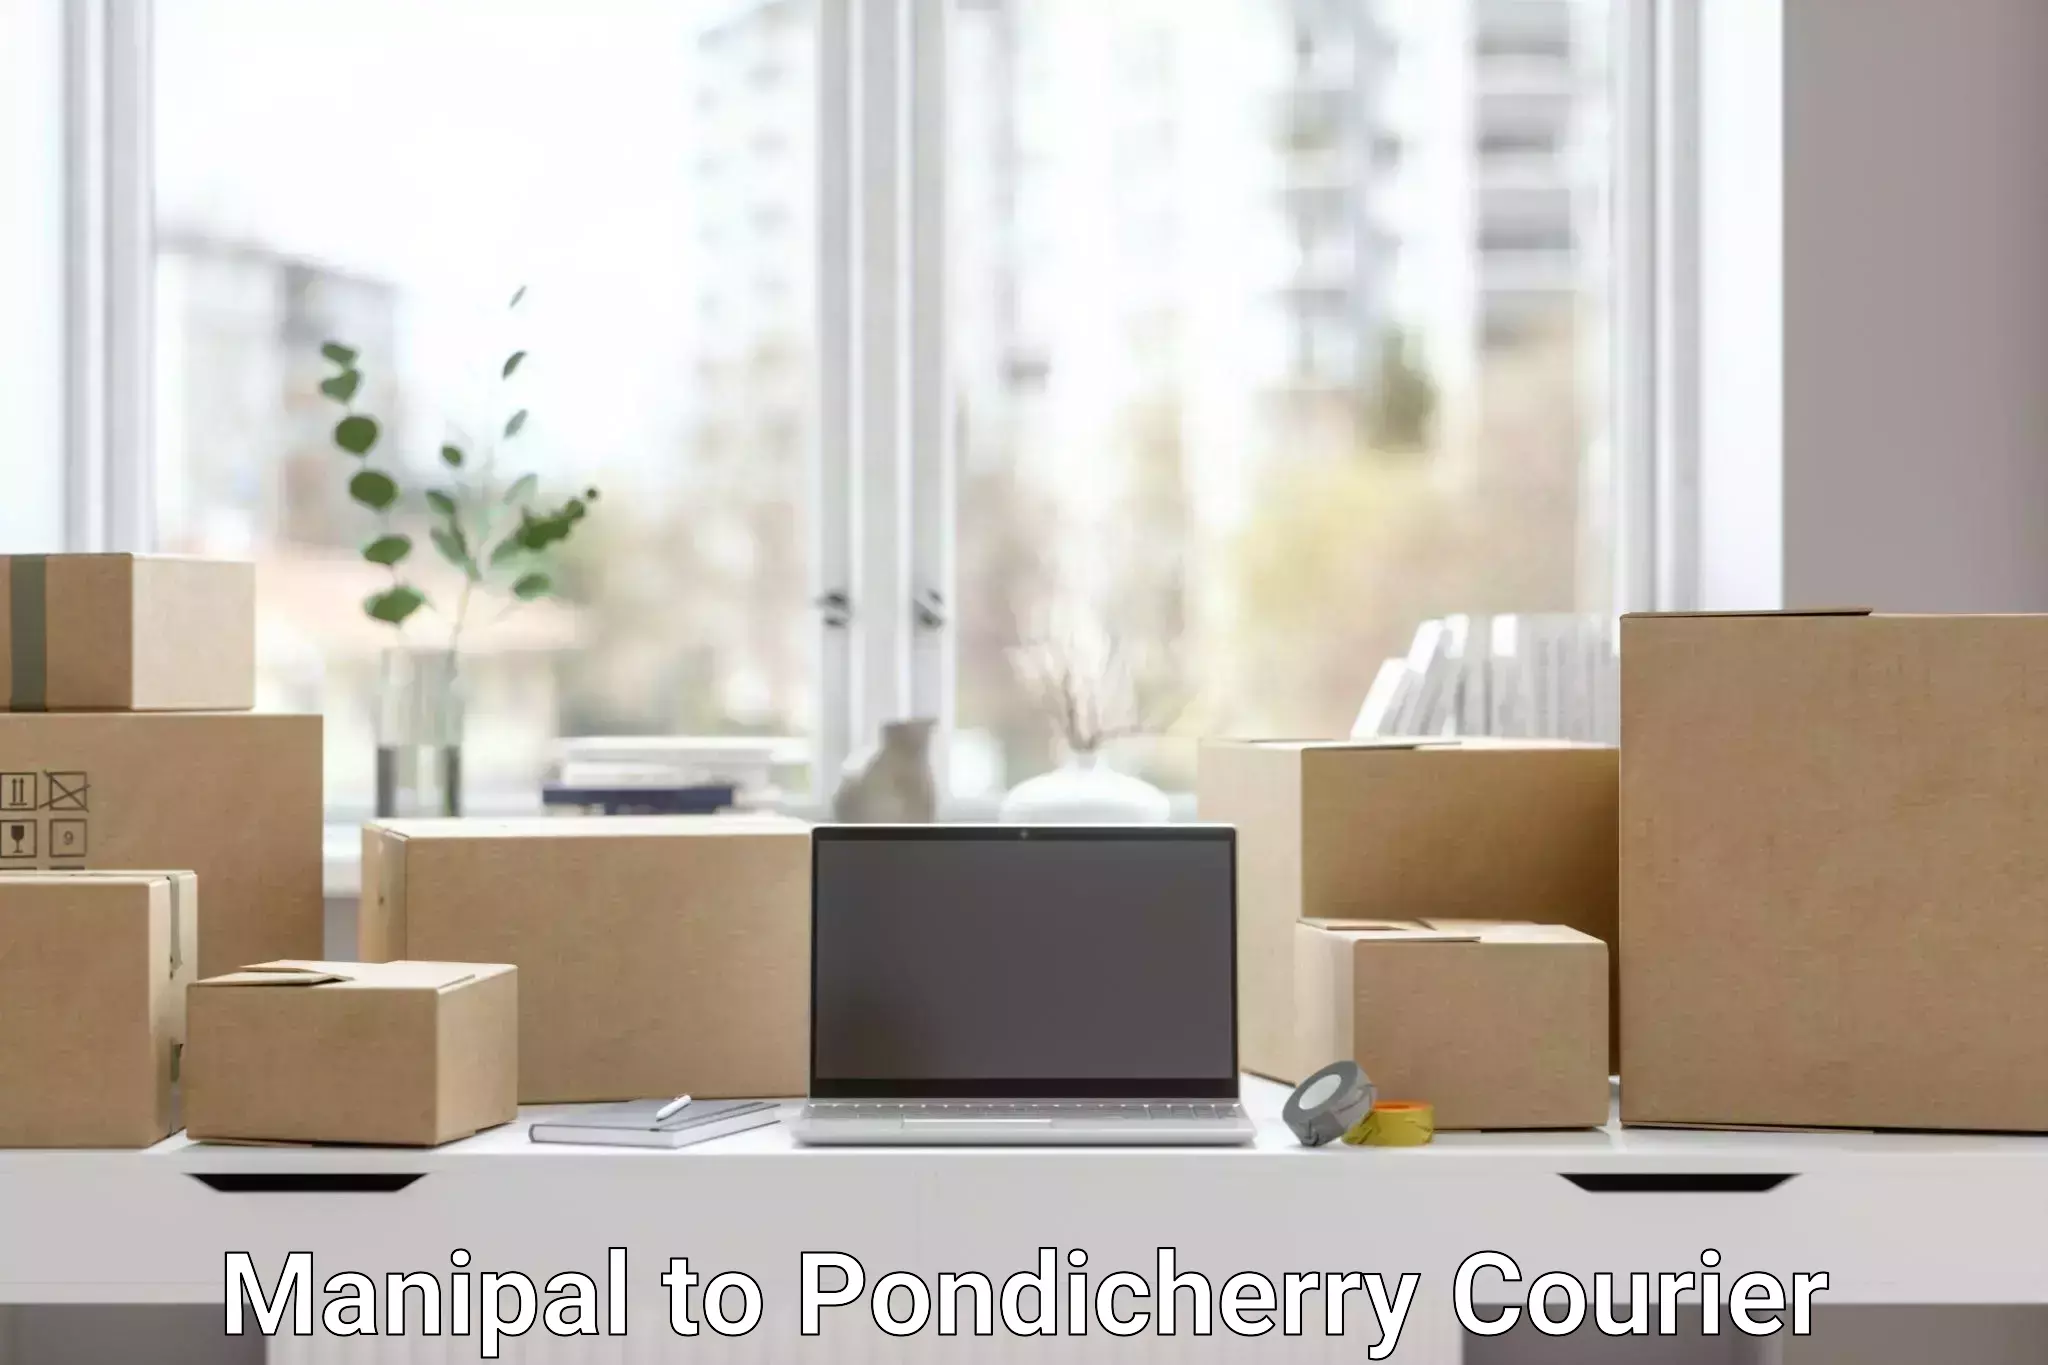 24-hour courier service in Manipal to Pondicherry University